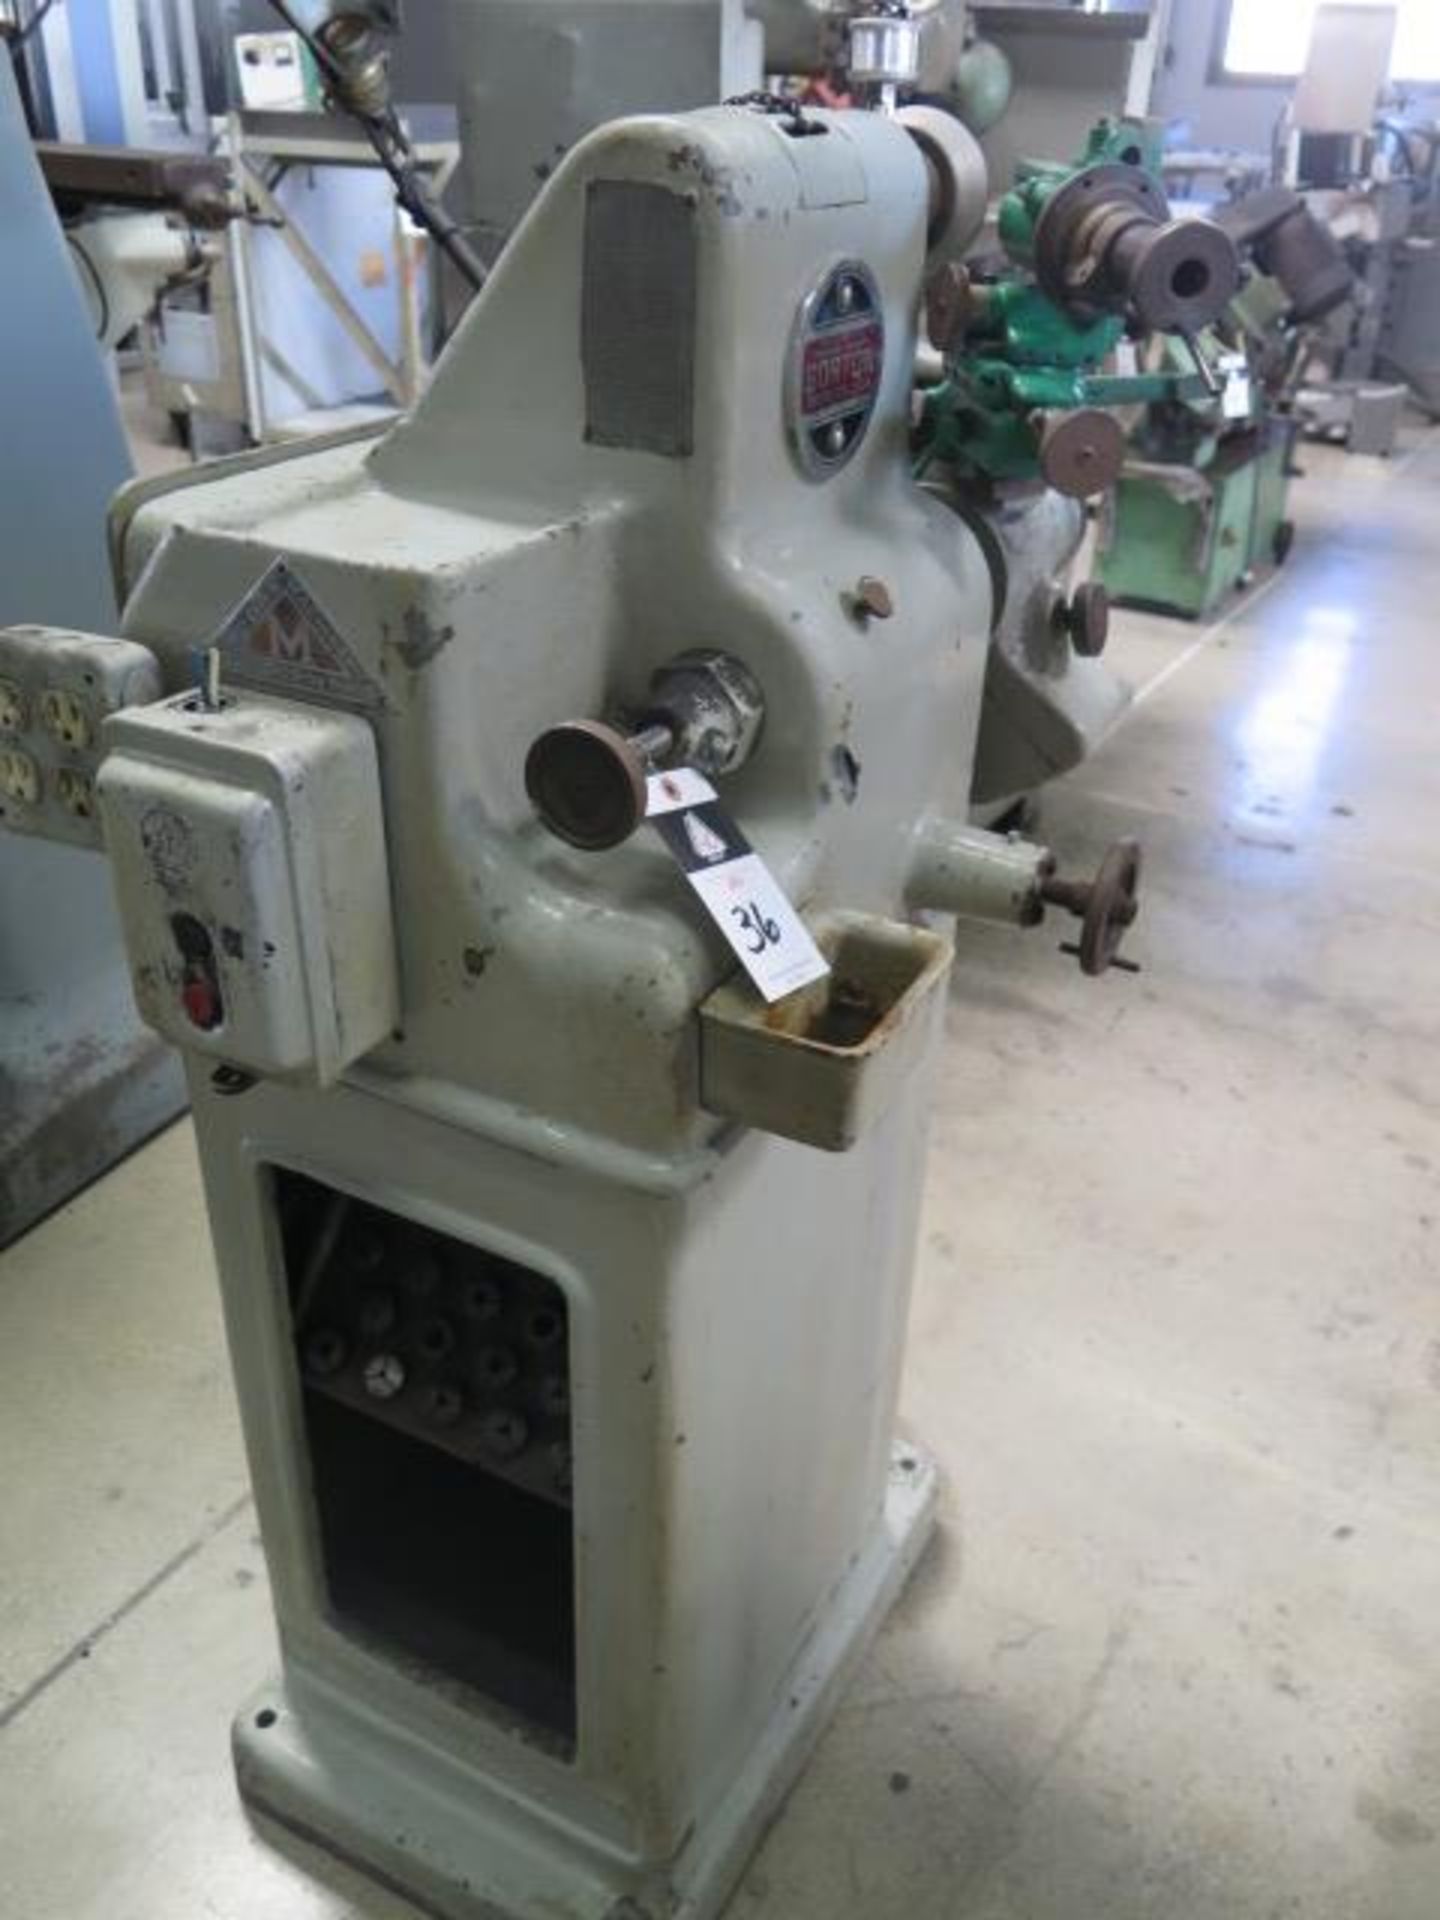 Gorton mdl. 375-2 Tool and Cutter Grinder w/ Diamond Wheel (SOLD AS-IS - NO WARRANTY) - Image 3 of 8